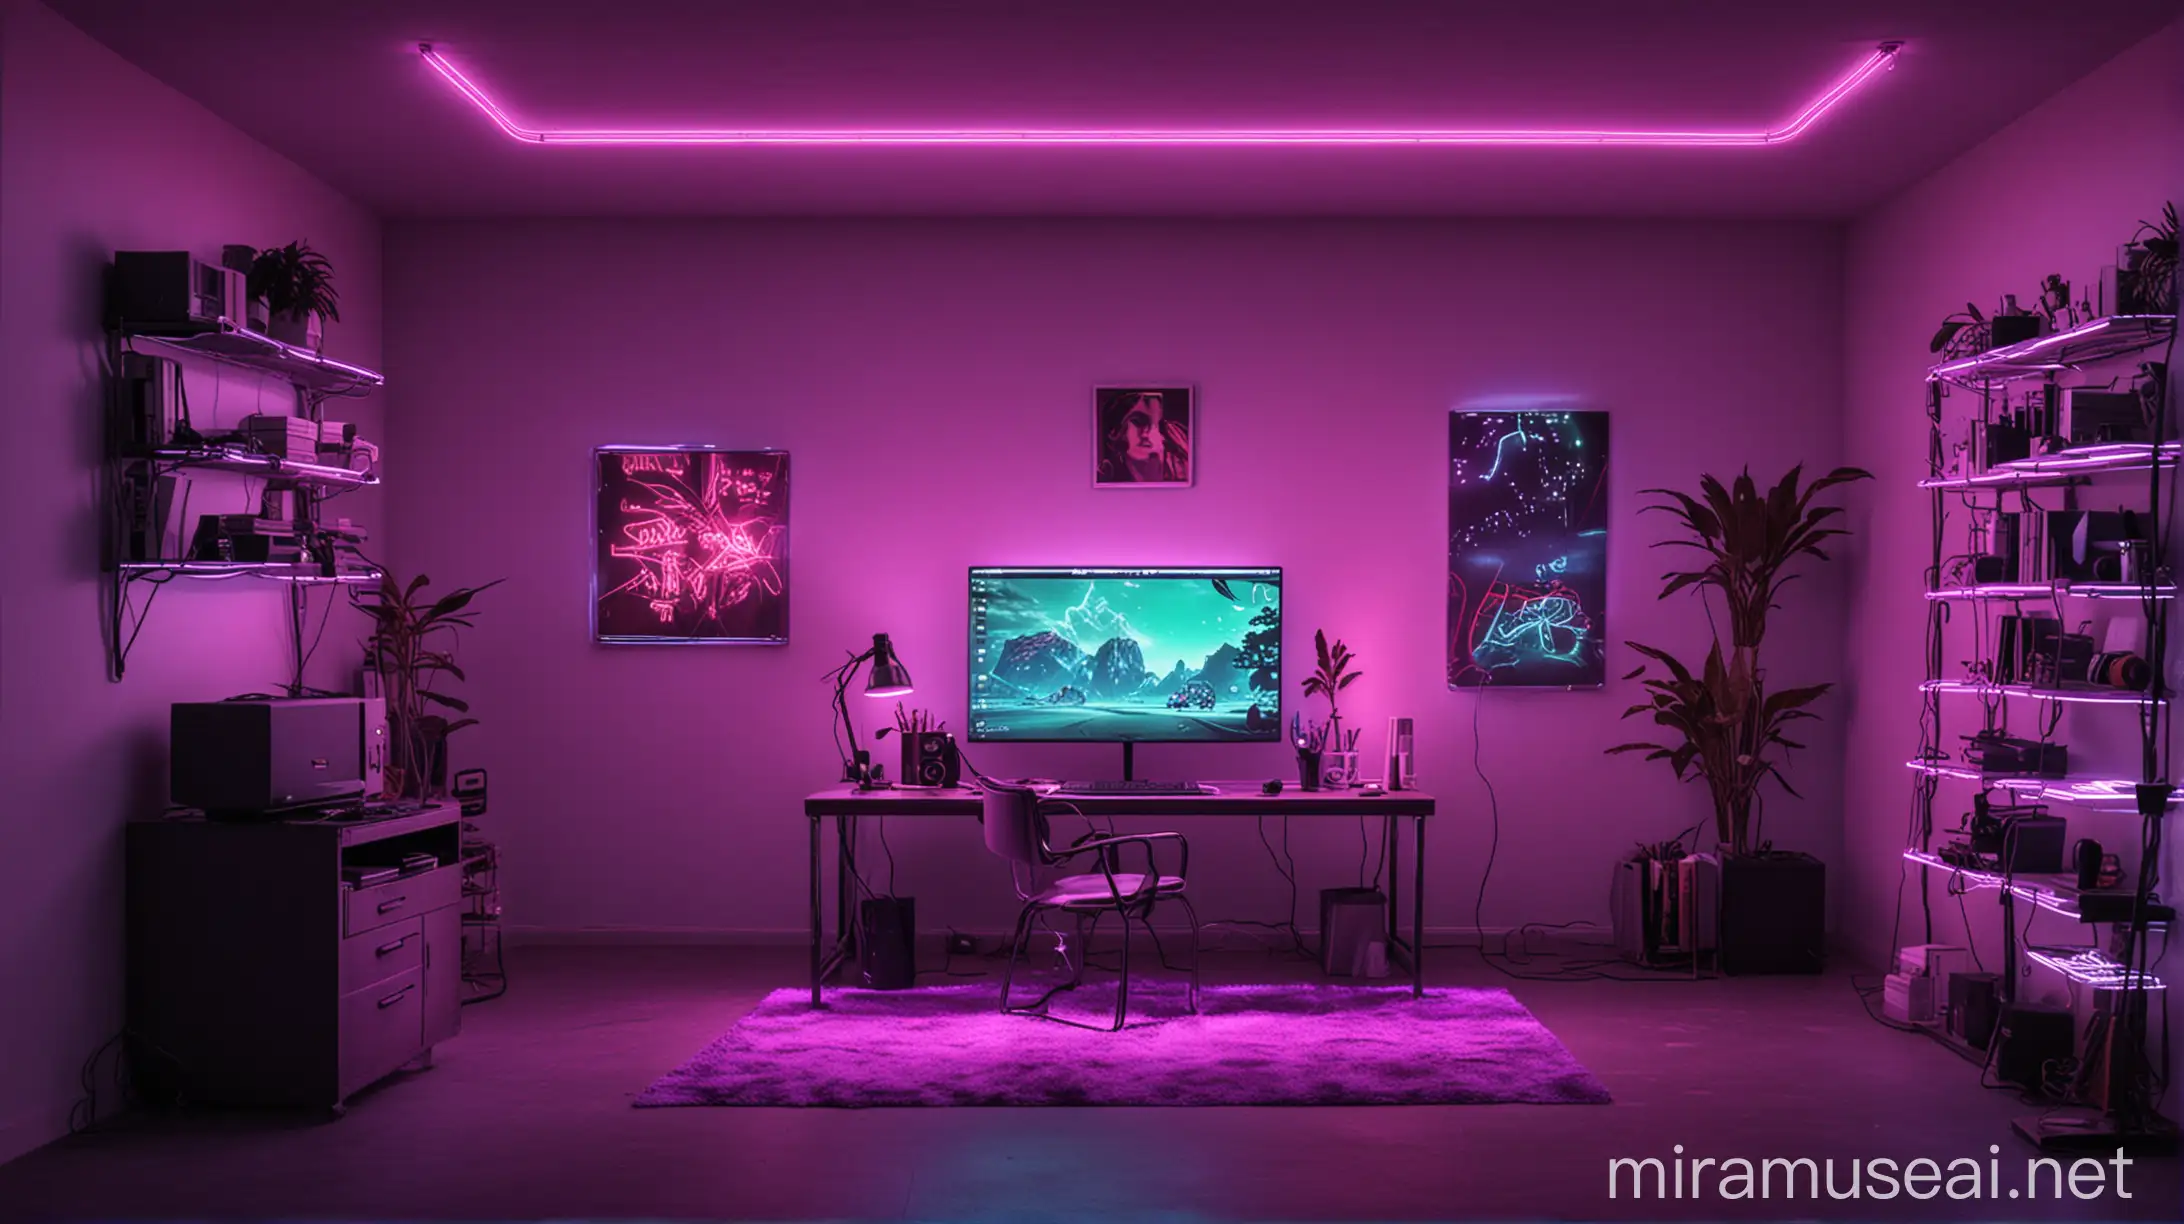 Futuristic Computer Environment with Neon Lights